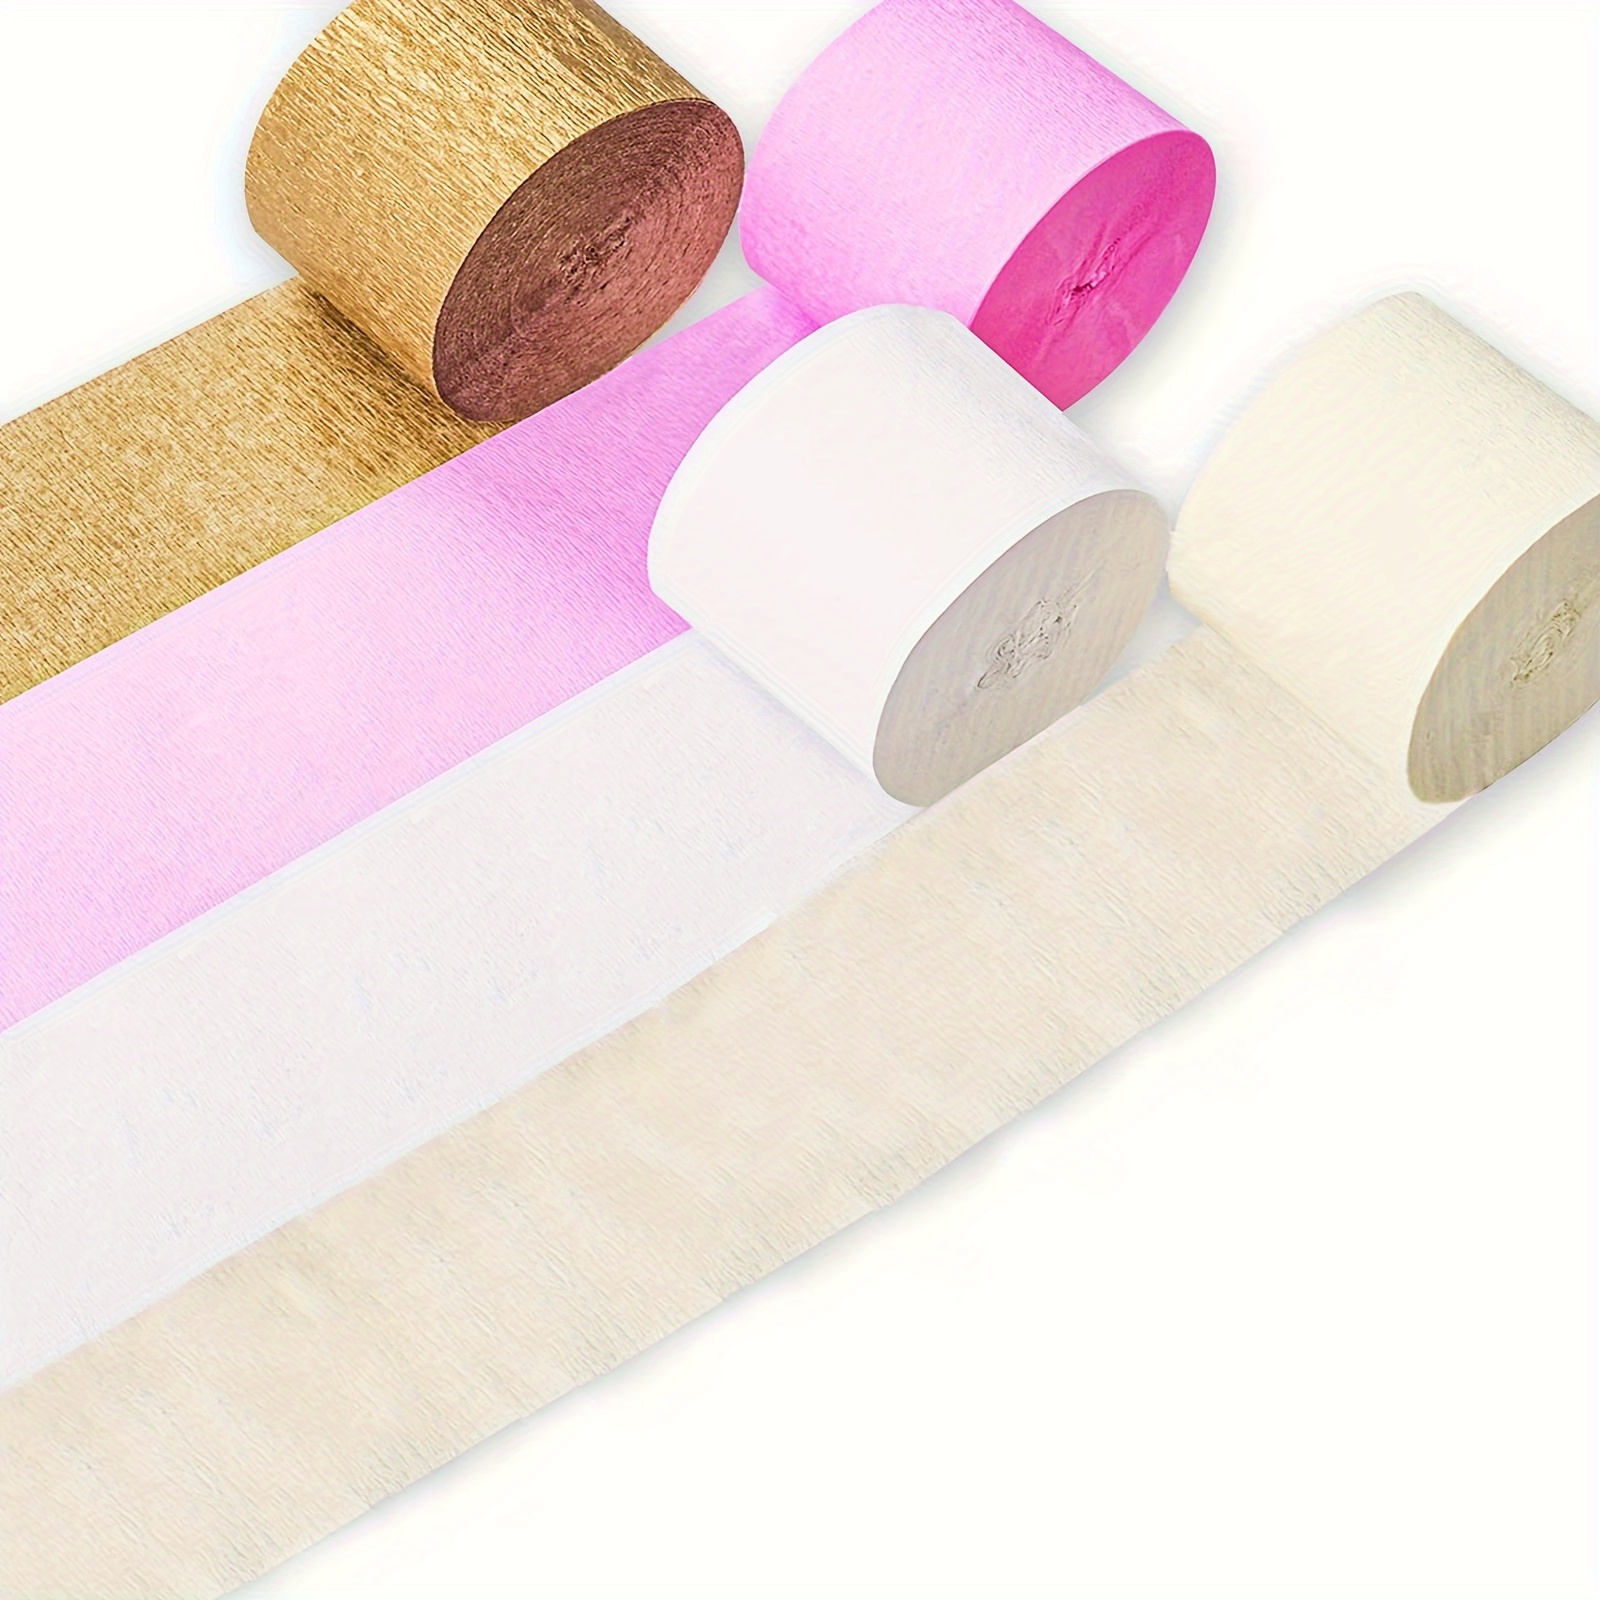 4 Rolls, Crepe Paper Streamers, Metallic Golden, White And Pink Party  Streamers For Party Decorations, Birthday Decorations, Wedding, Valentine's  Day